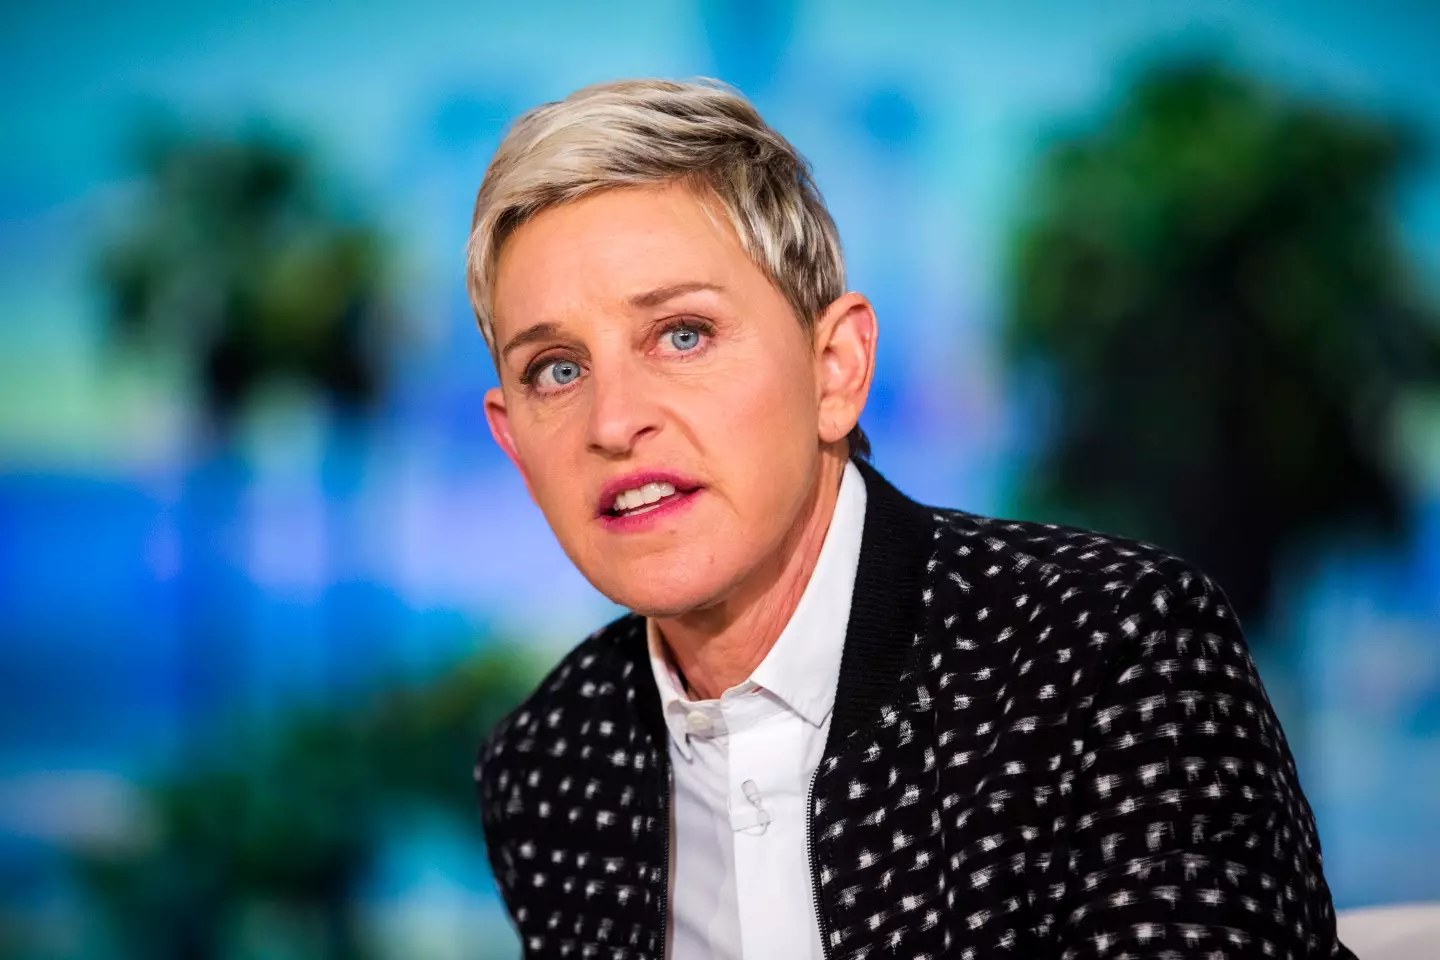 Ellen Degeneres' show came to an end in 2022 after 19 years. (Brooks Kraft/Getty Images)